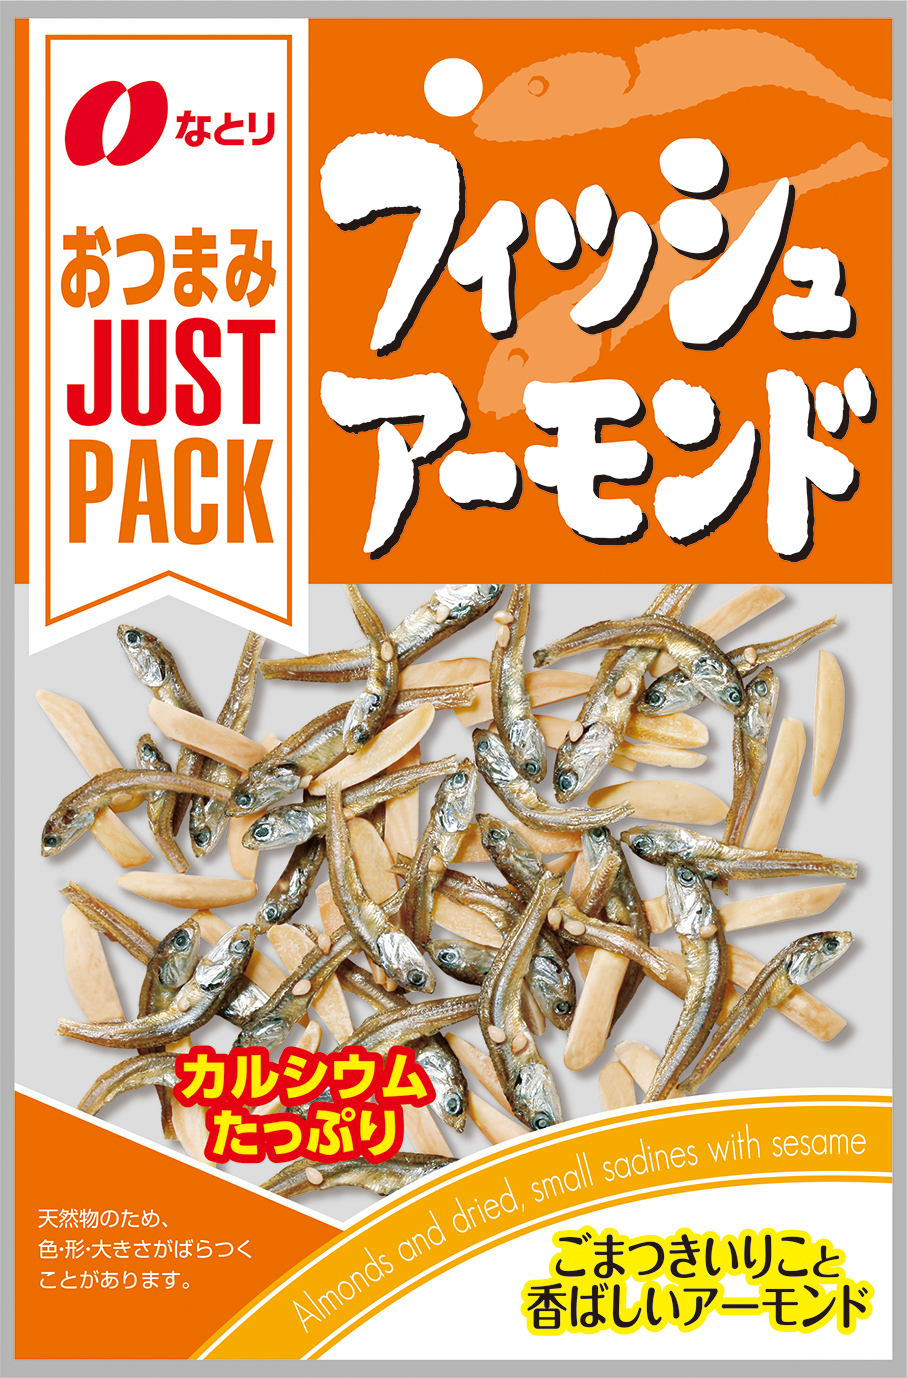 JUST PACK<br>フィッシュアーモンド